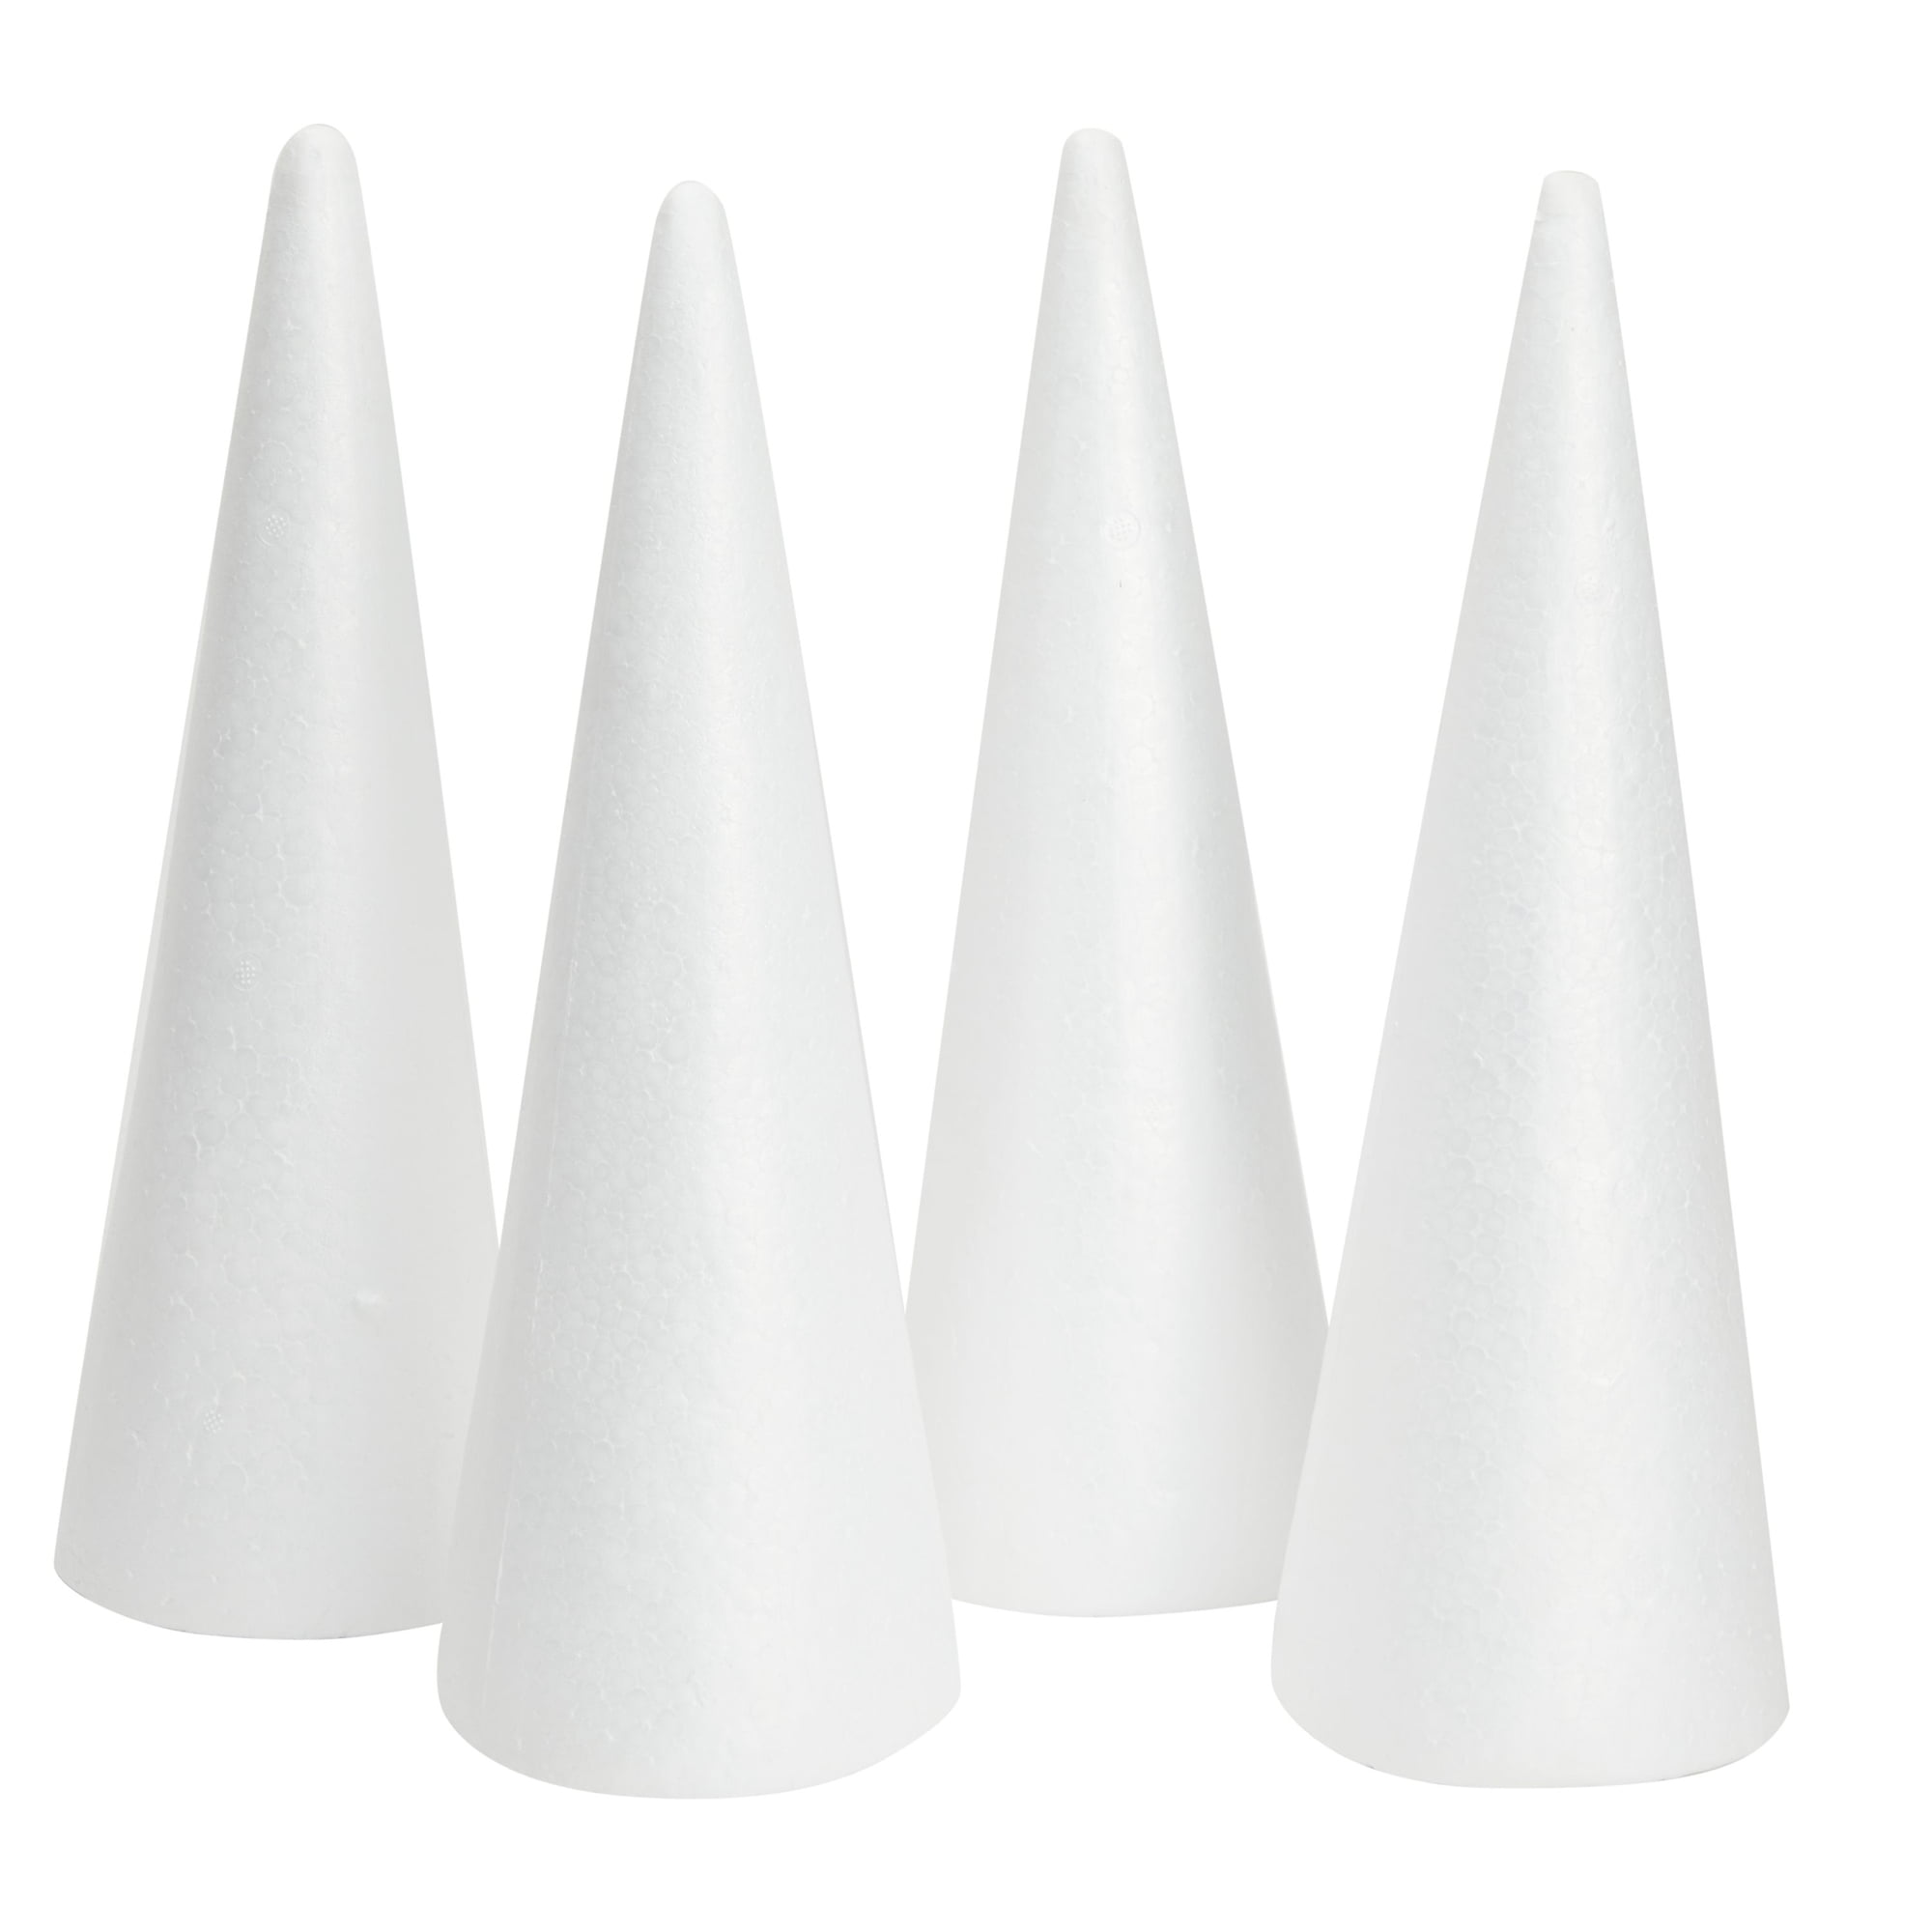 Craft Foam Cone Christmas Tree for DIY Crafts (10.2 Inches, 3 Pack